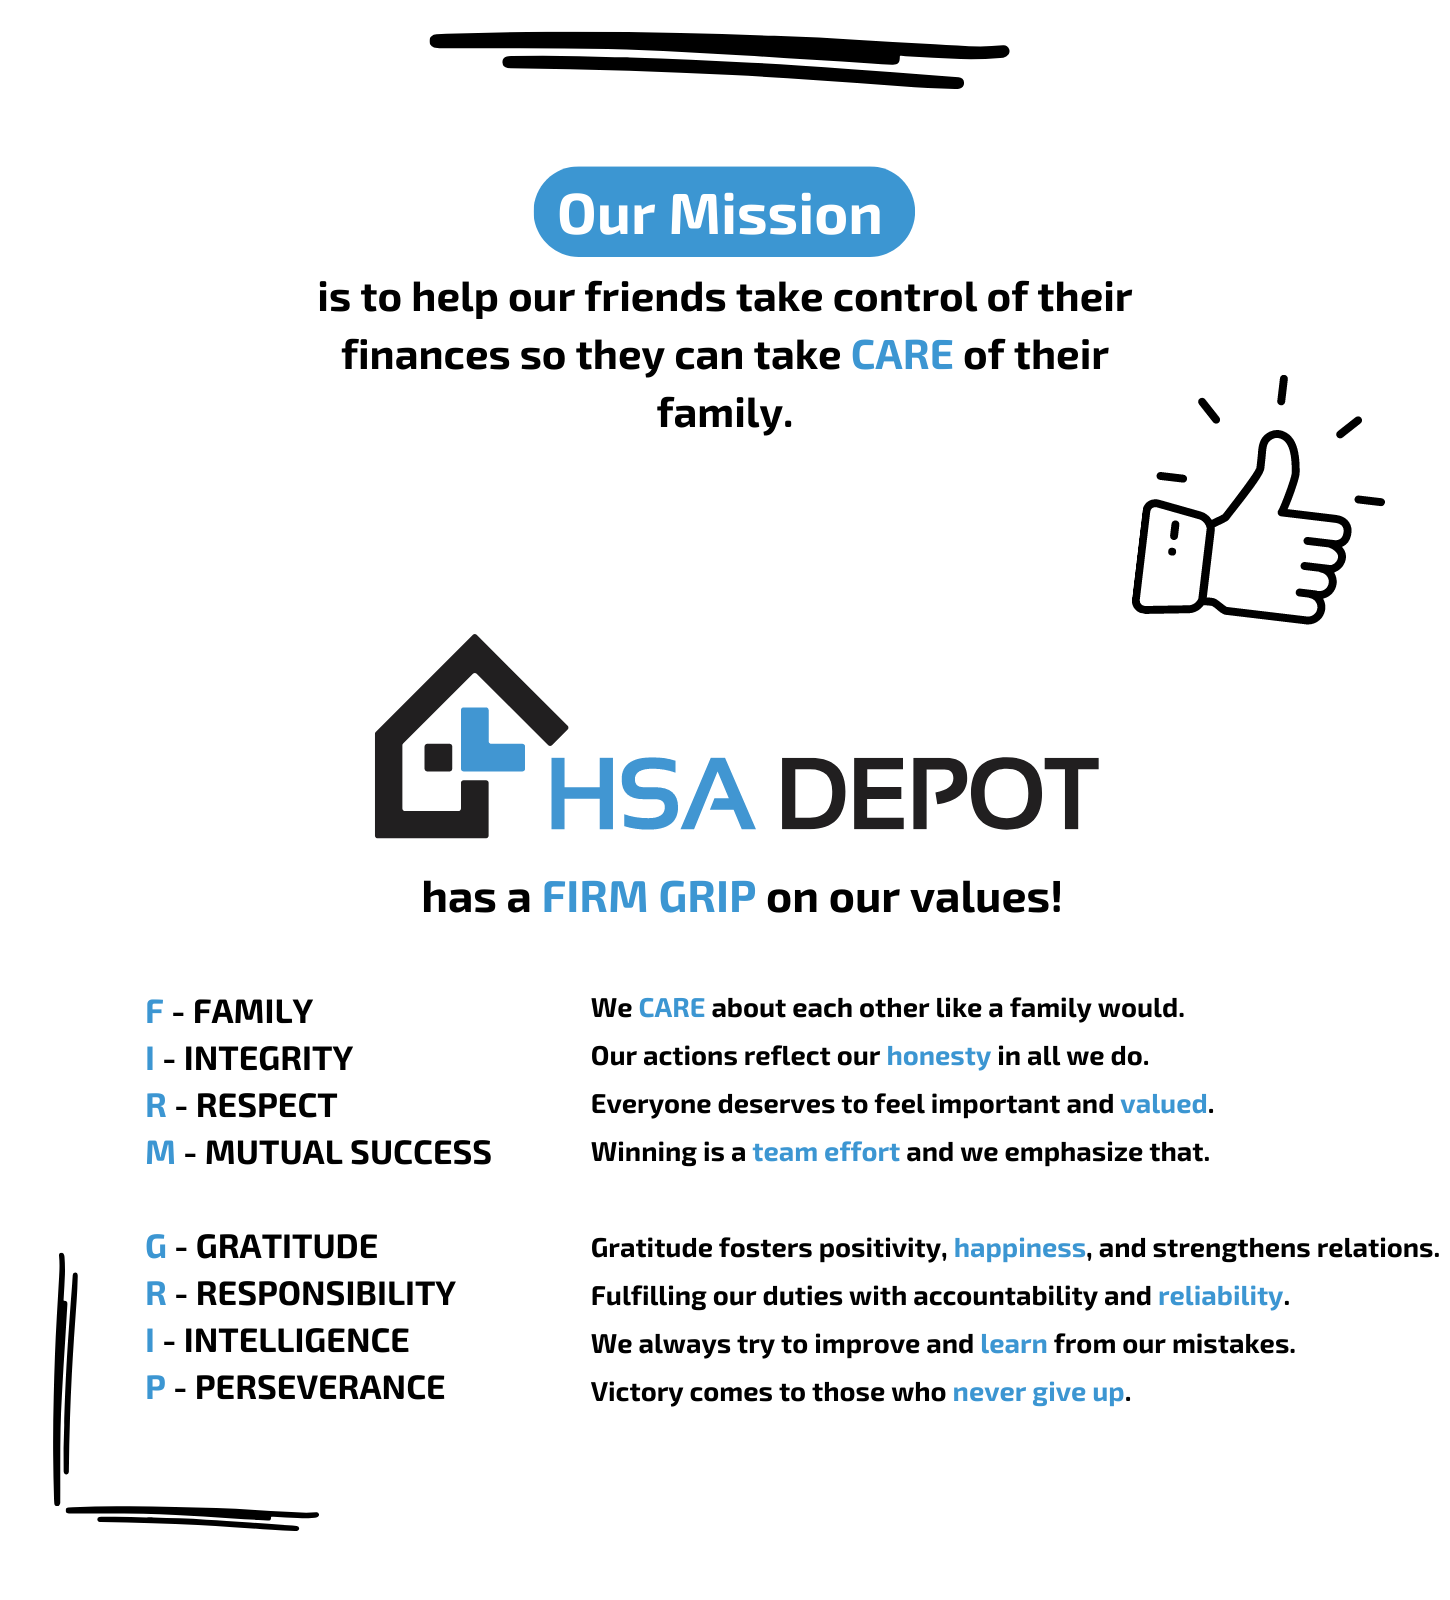 Our mission at HSA Depot is to help our friends take control of their finances and take care of their families. HSA Depot has a firm grip on their values. F stands for family. We care about each other like a family would. I is for integrity. Our actions reflect our honesty in all we do. R is for respect. Everyone deserves to feel important and valued. M is for mutual success. Winning is a team effort and we emphasize that. G is for gratitude. Gratitude fosters positivity, happiness, and strengthens relations. I is for intelligence. We always try to improve and learn from our mistakes. P is for perseverance. Victory comes to those who never give up. 